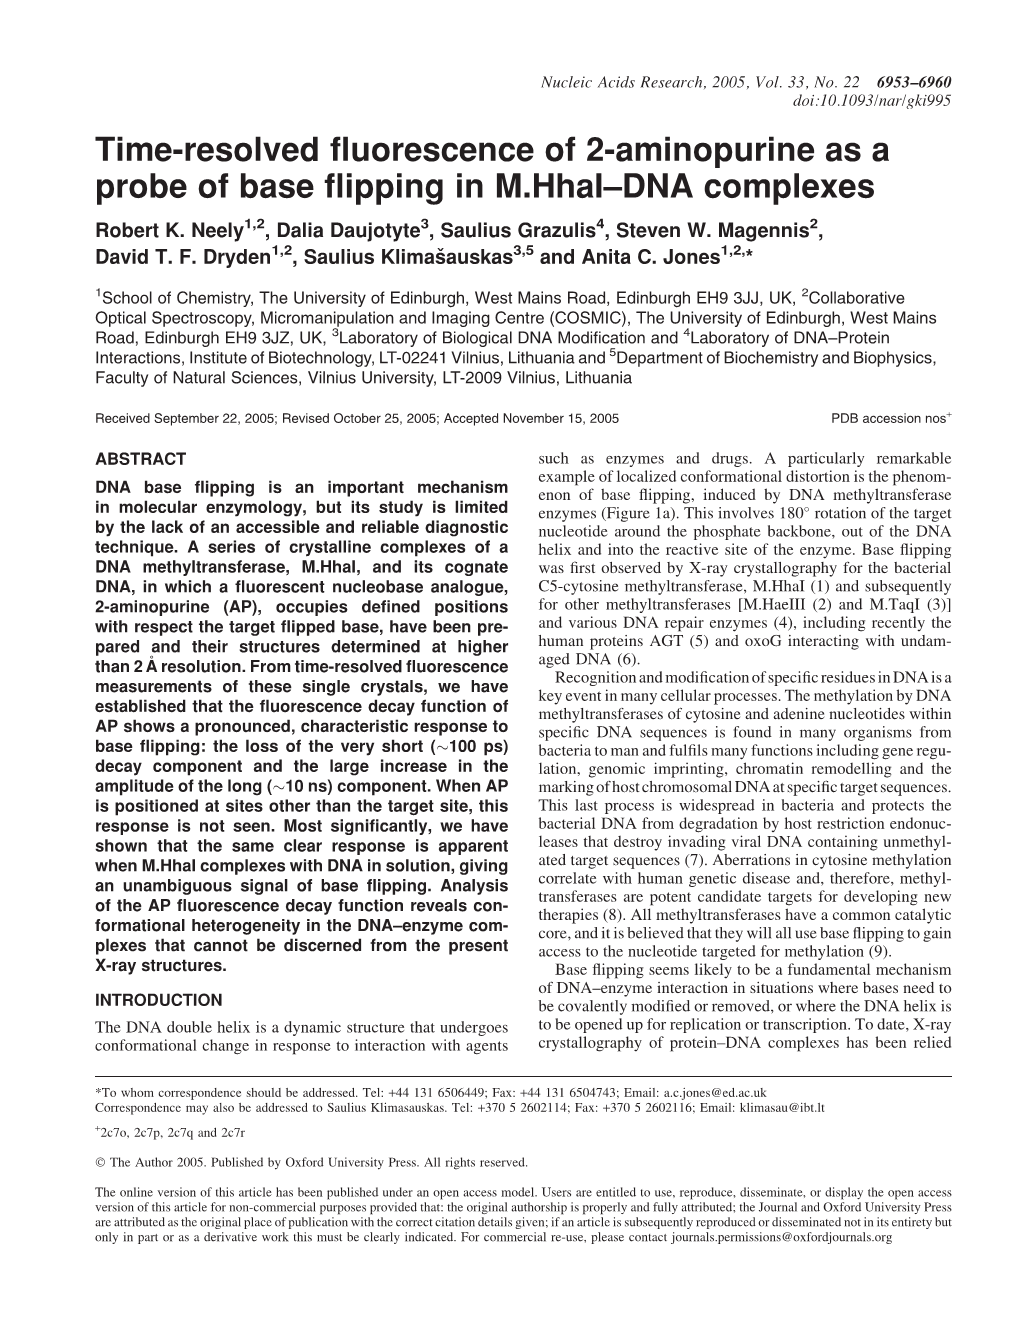 Time-Resolved Fluorescence of 2-Aminopurine As a Probe of Base Flipping in M.Hhai–DNA Complexes Robert K